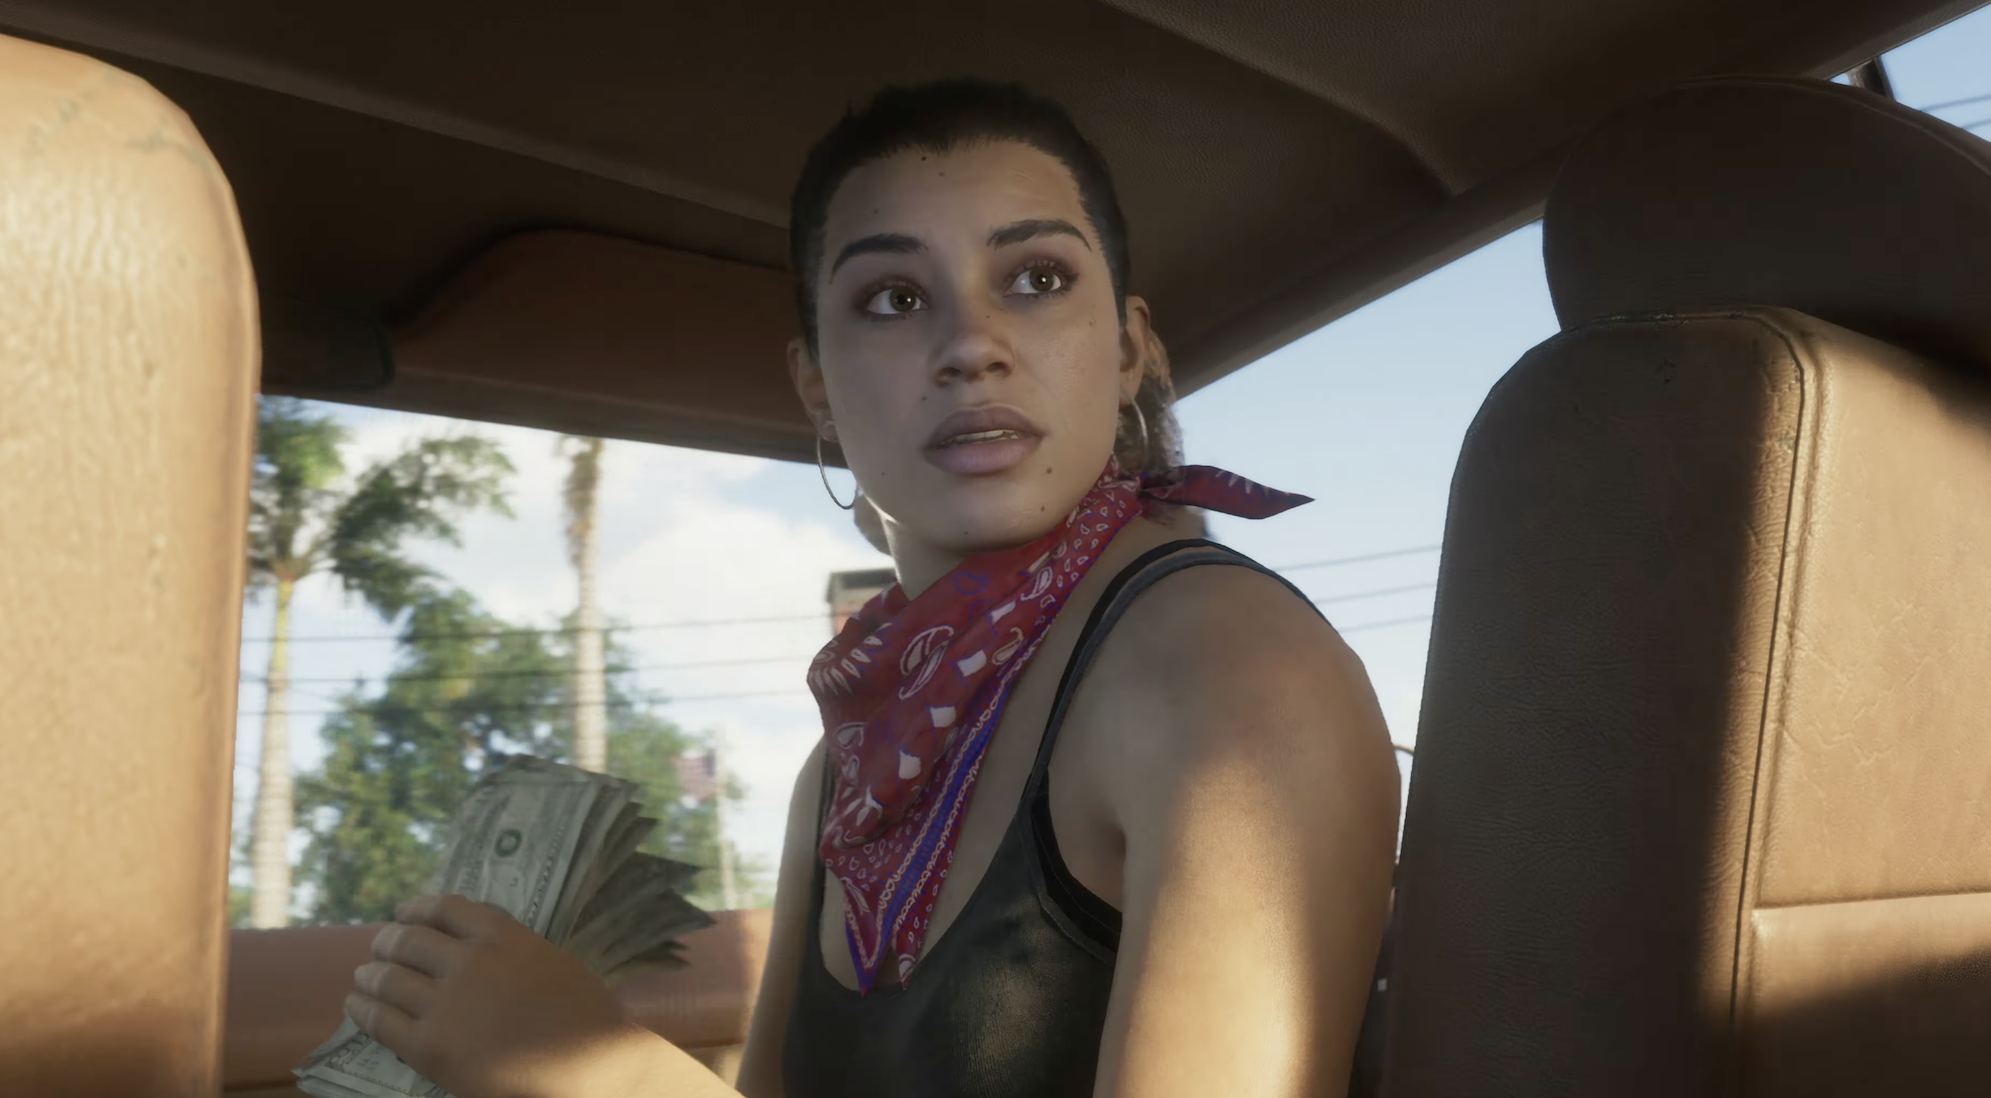 Rockstar should address growing GTA V controversy as soon as possible